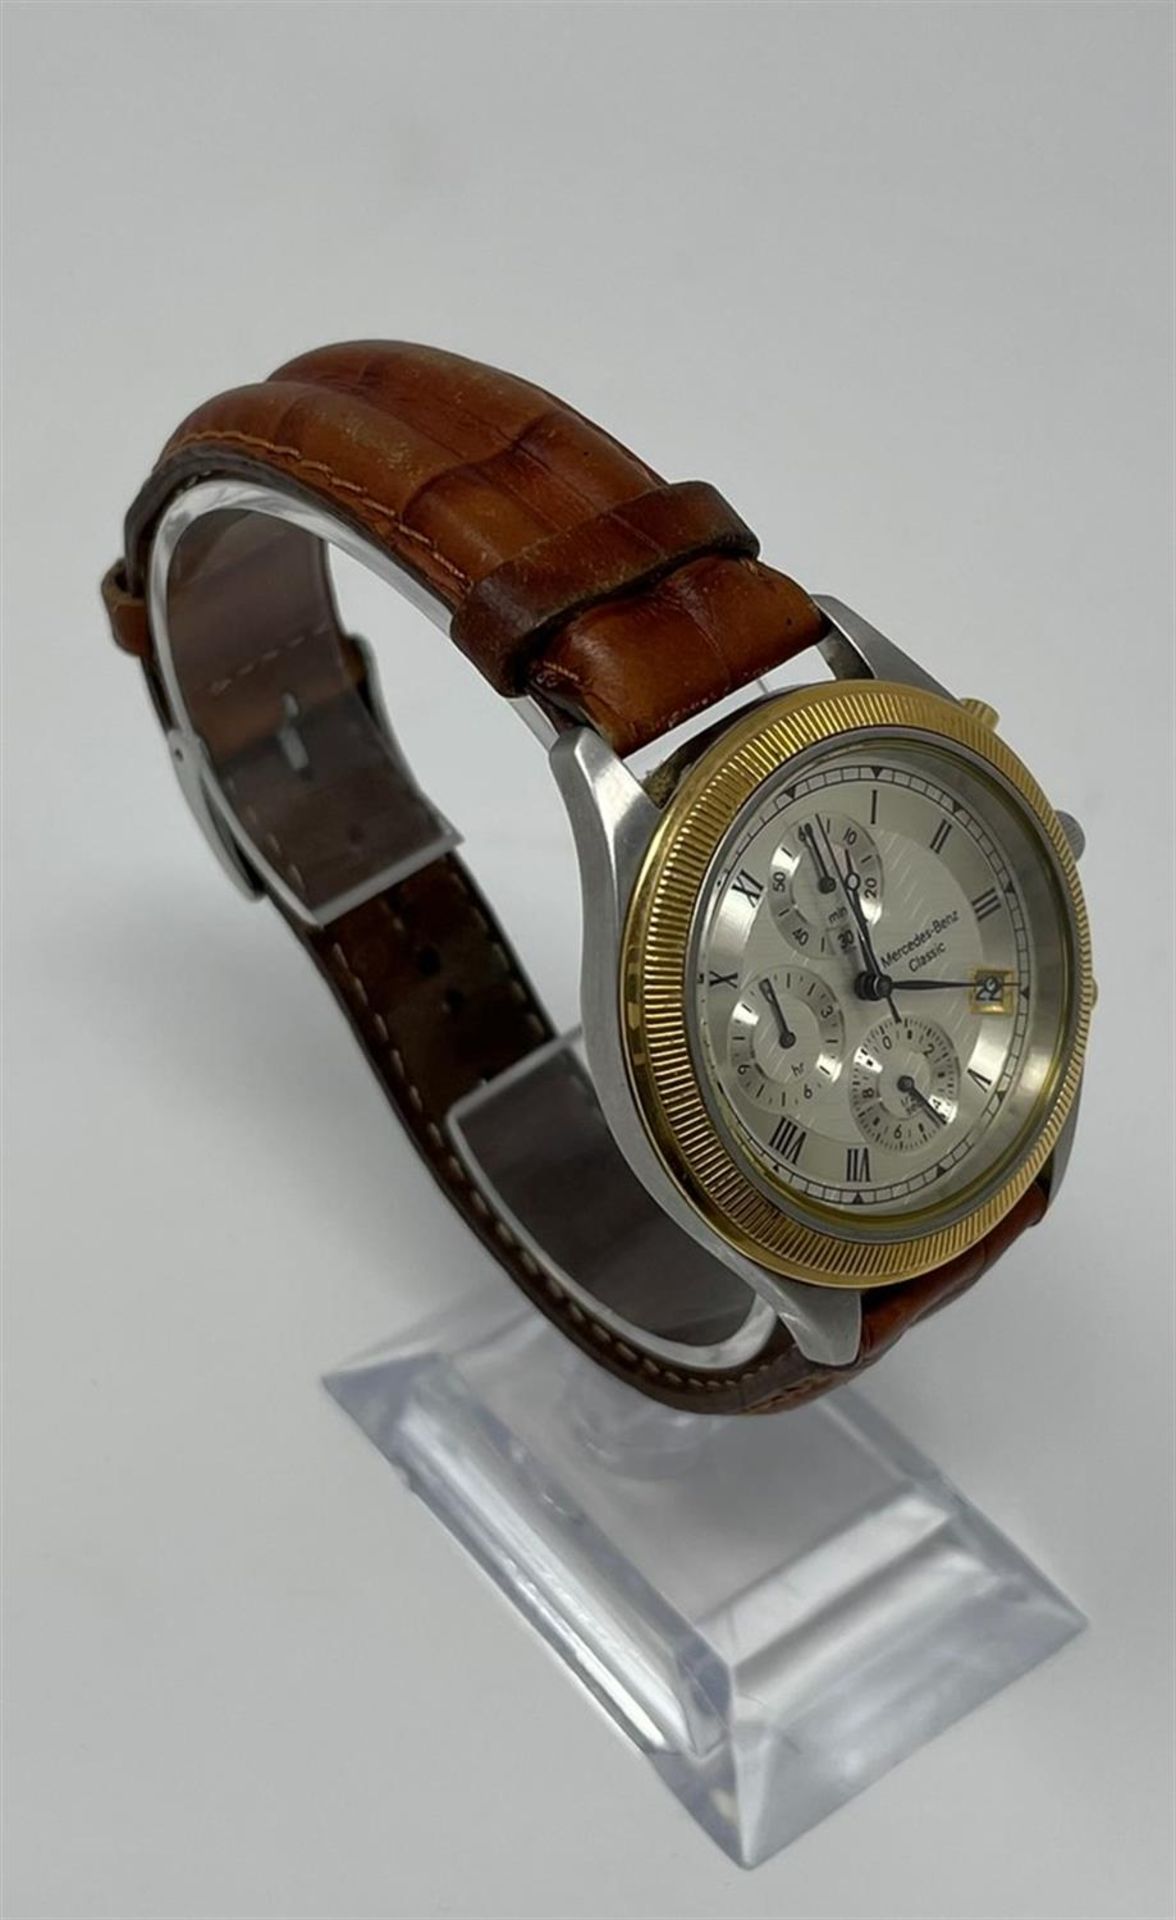 'Mercedes-Benz' Classic Leather-Strapped Chronograph Wristwatch - Image 2 of 10